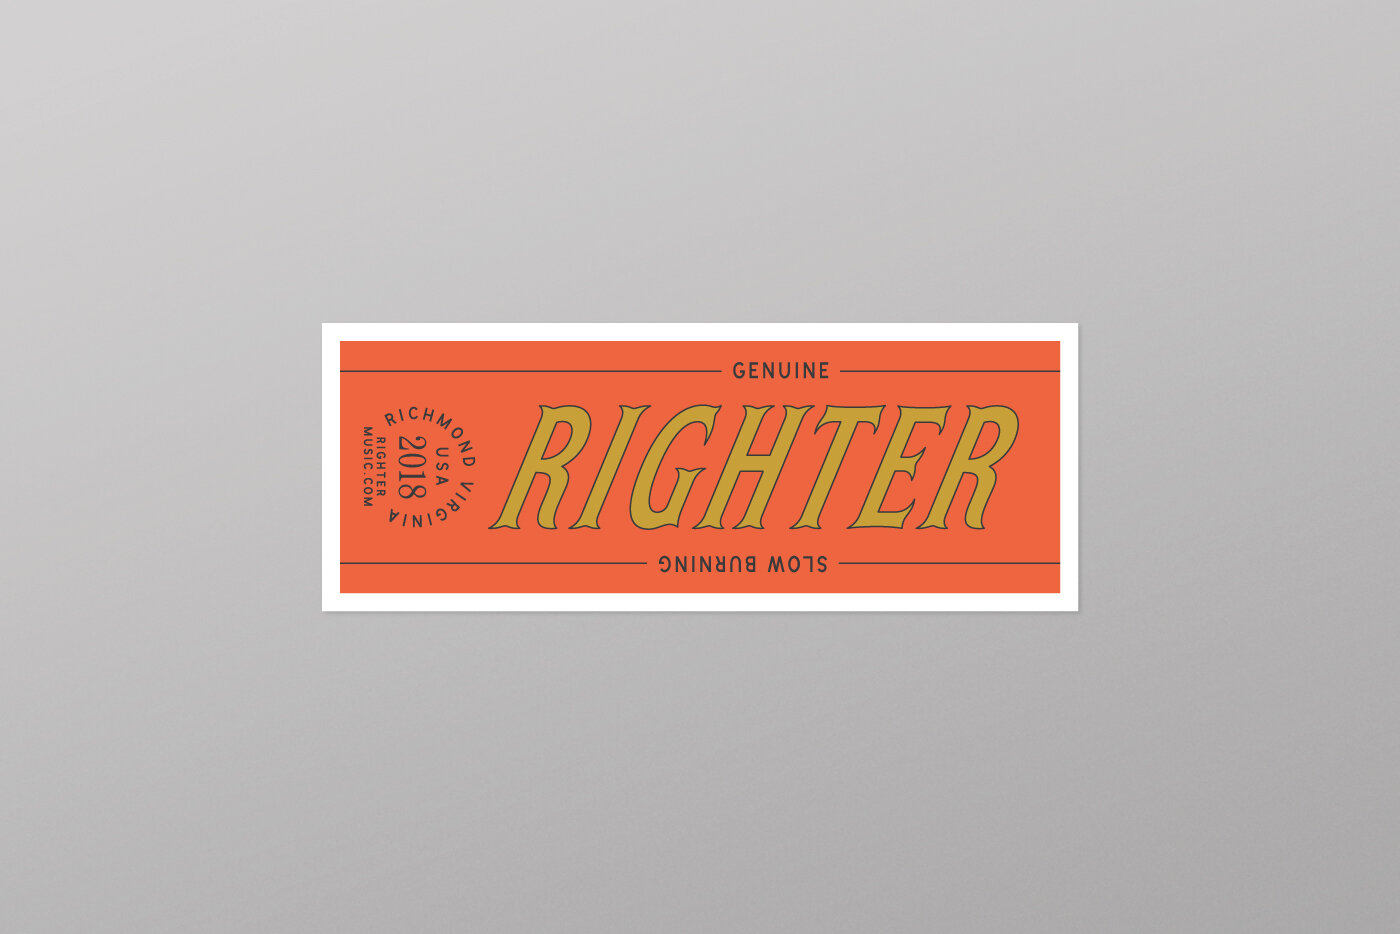 Righter Band Sticker